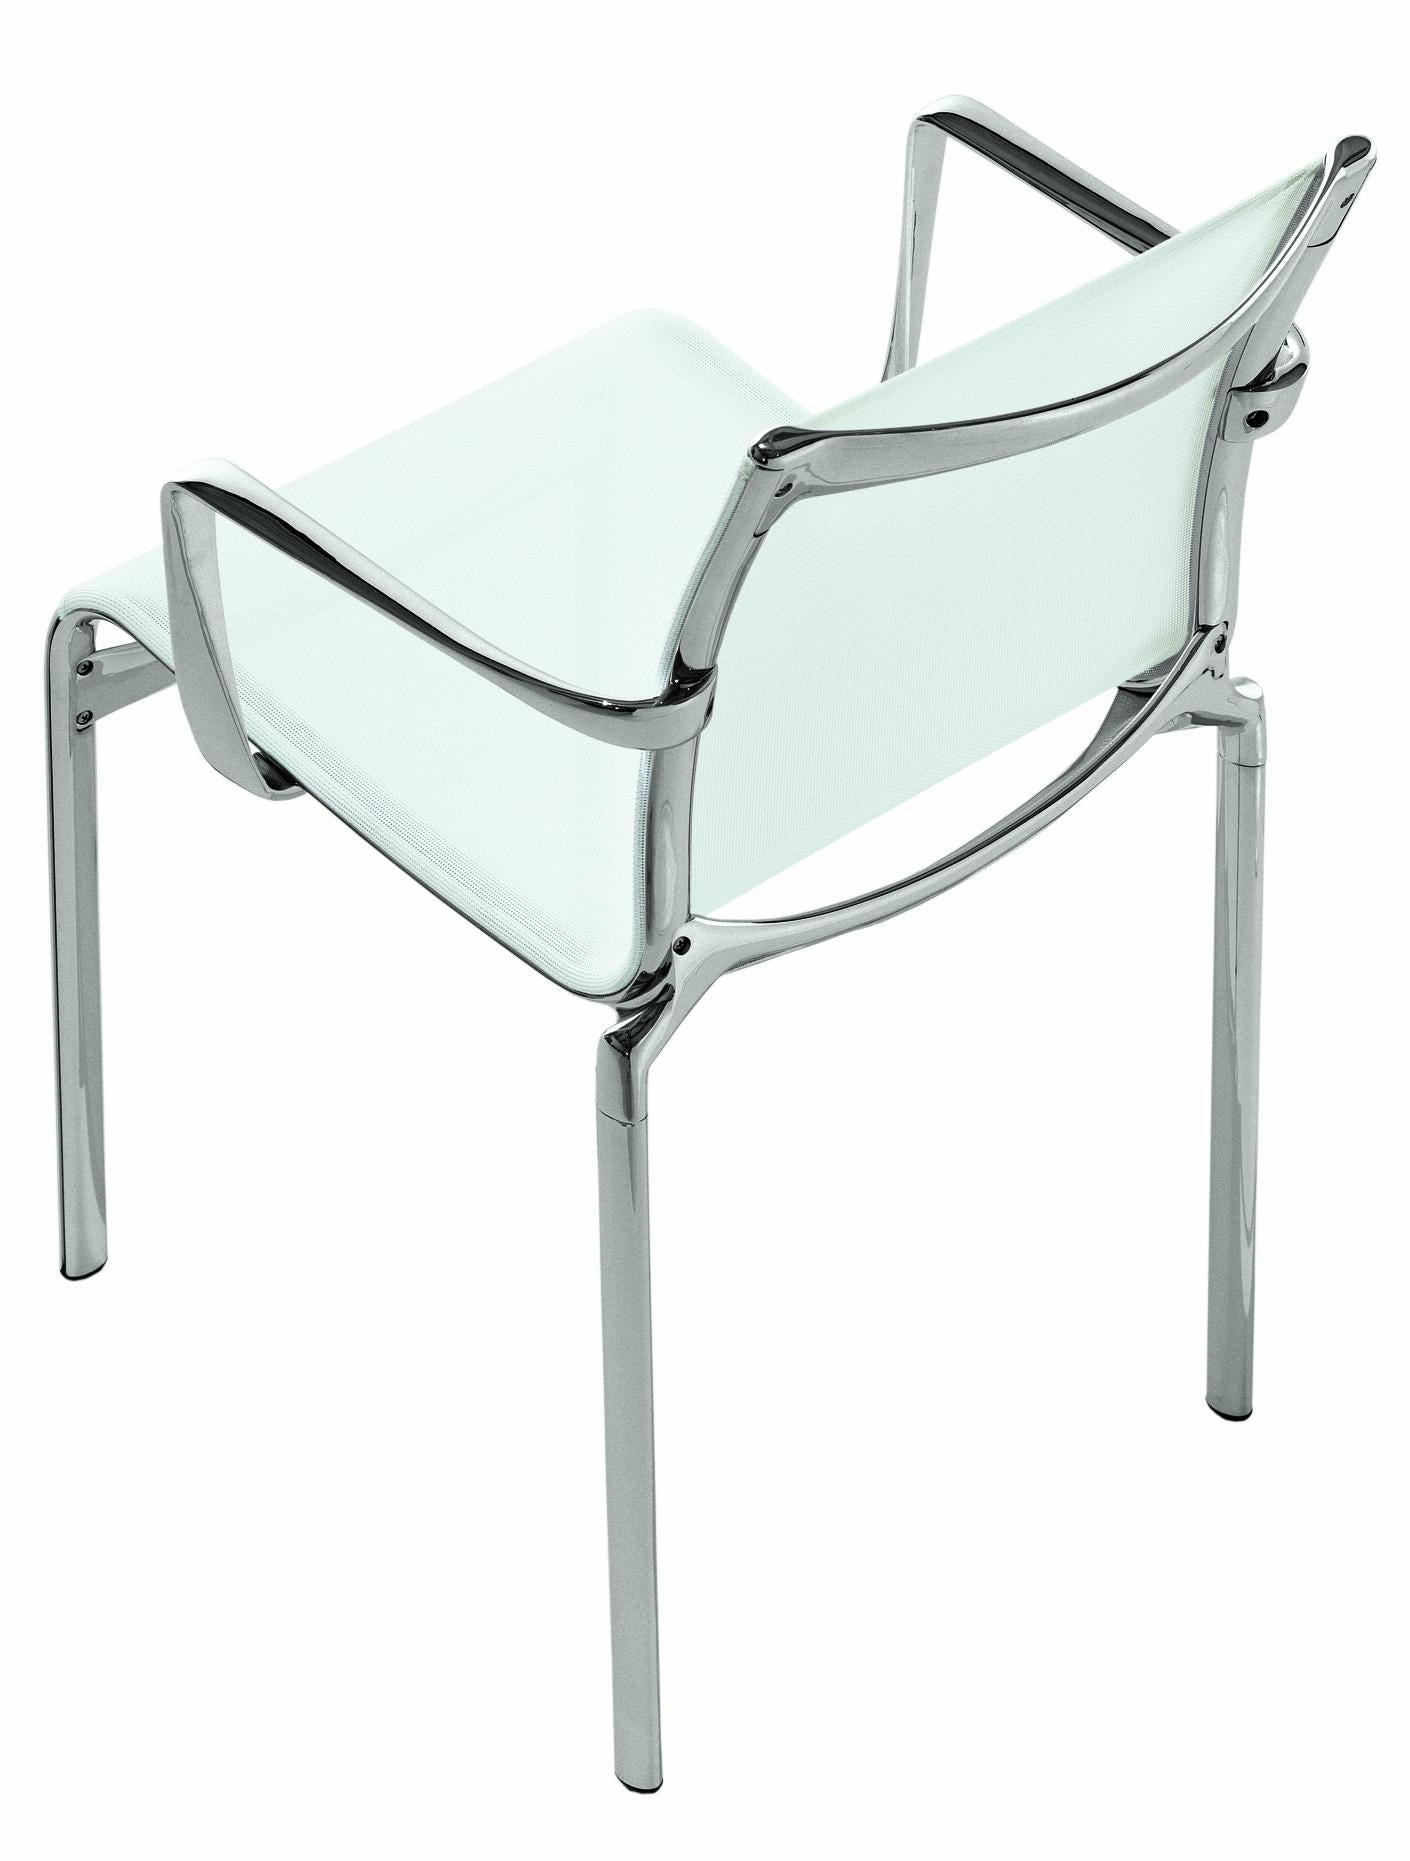 Alias Bigframe 44 Armchair in White Mesh Seat with Chromed Aluminium Frame by Alberto Meda

Stacking chair with arms, structure composed of extruded aluminium profile and die-cast aluminium elements. Seat and back in fire retardant PVC covered